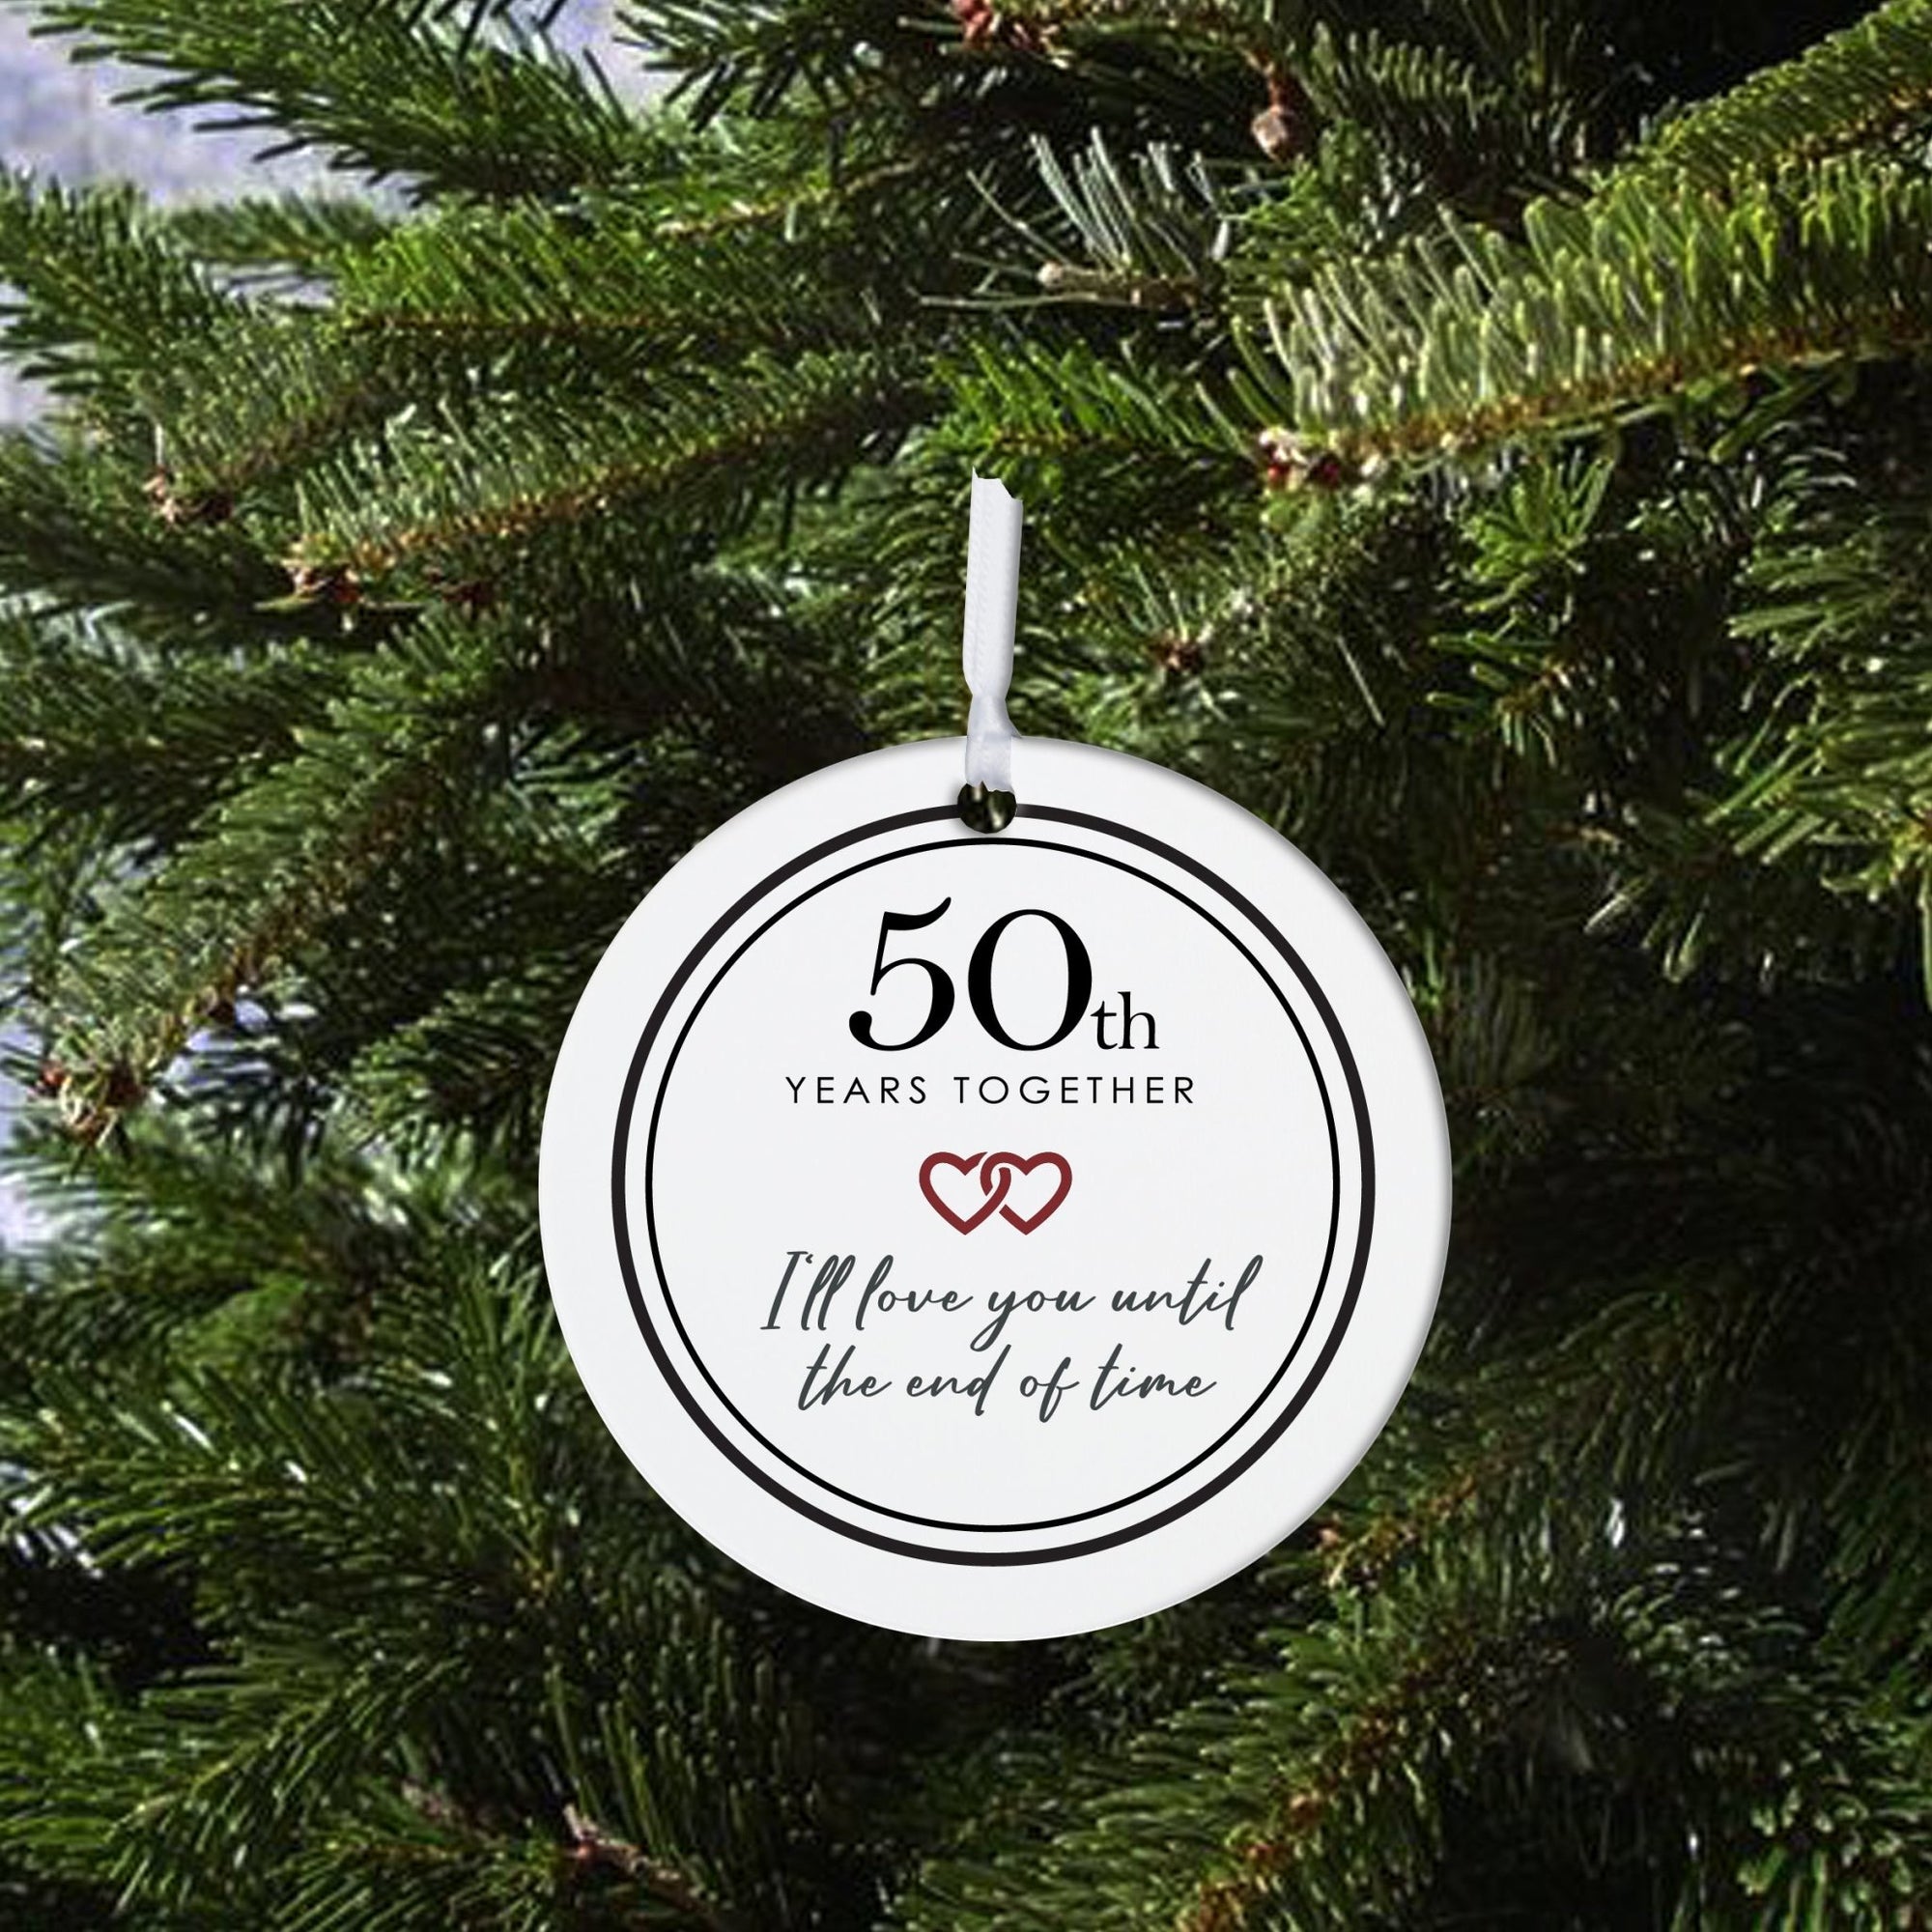 50th Year Together Wedding Anniversary White Ornament With Inspirational Message Gift Ideas - I Love You Till The End Of Time - LifeSong Milestones